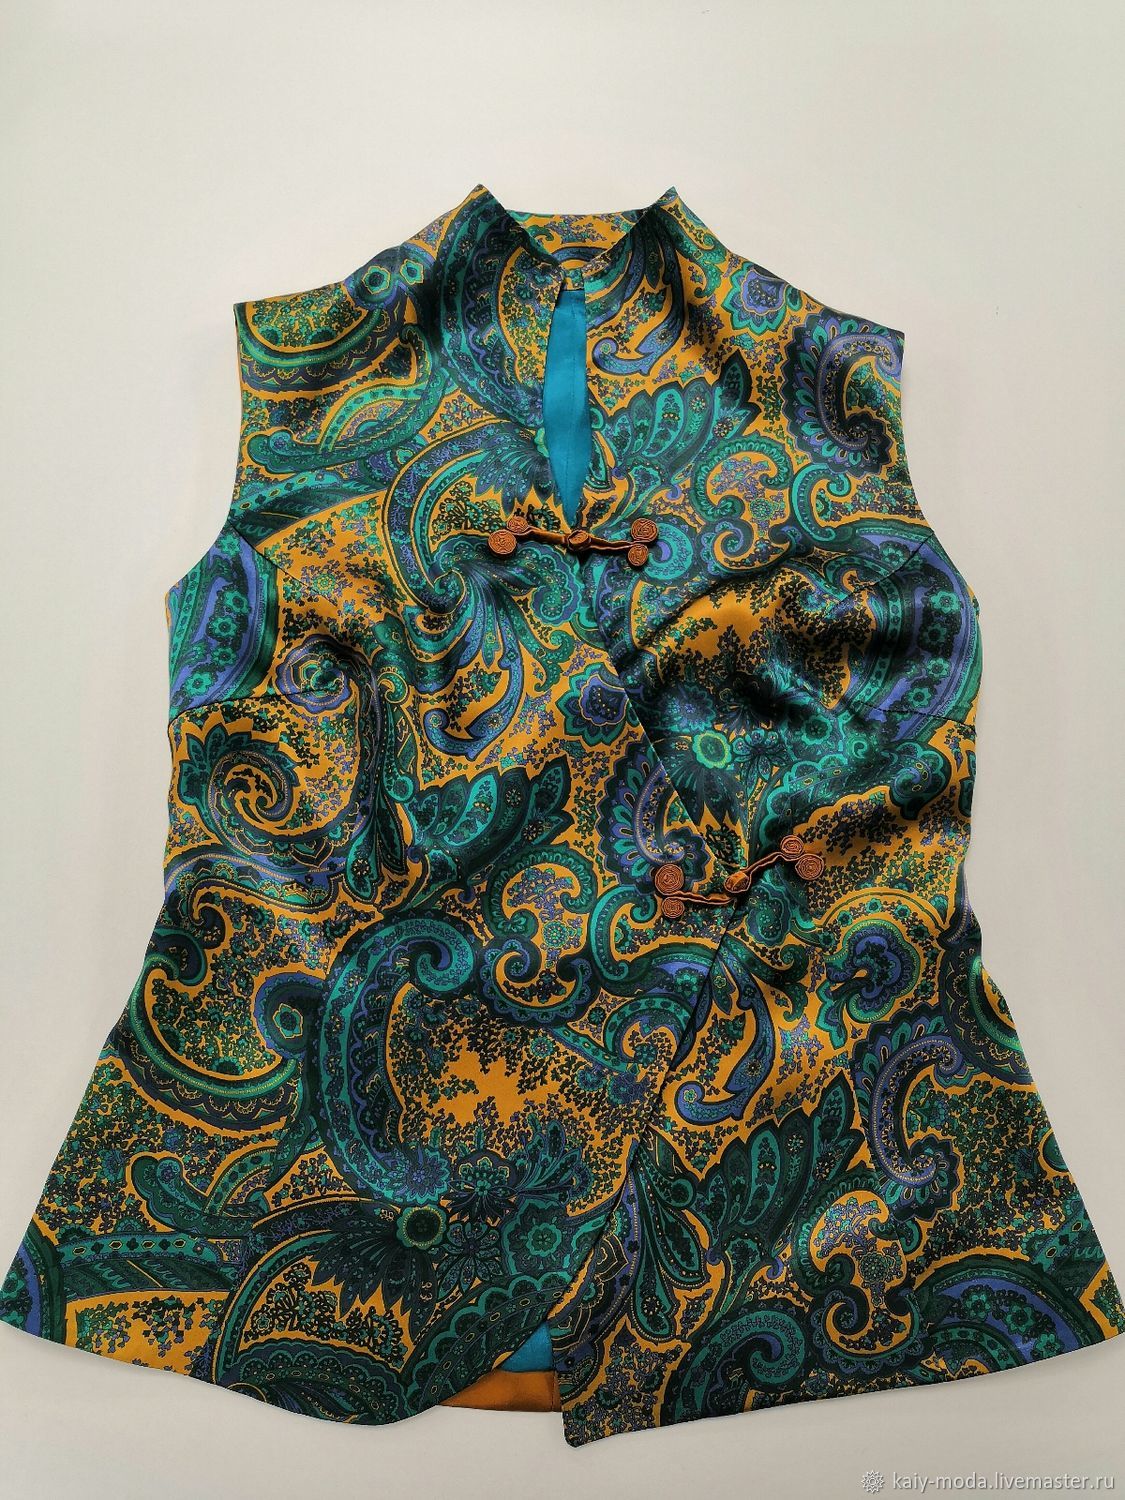 A silk vest in an Oriental style, Vests, Moscow,  Фото №1